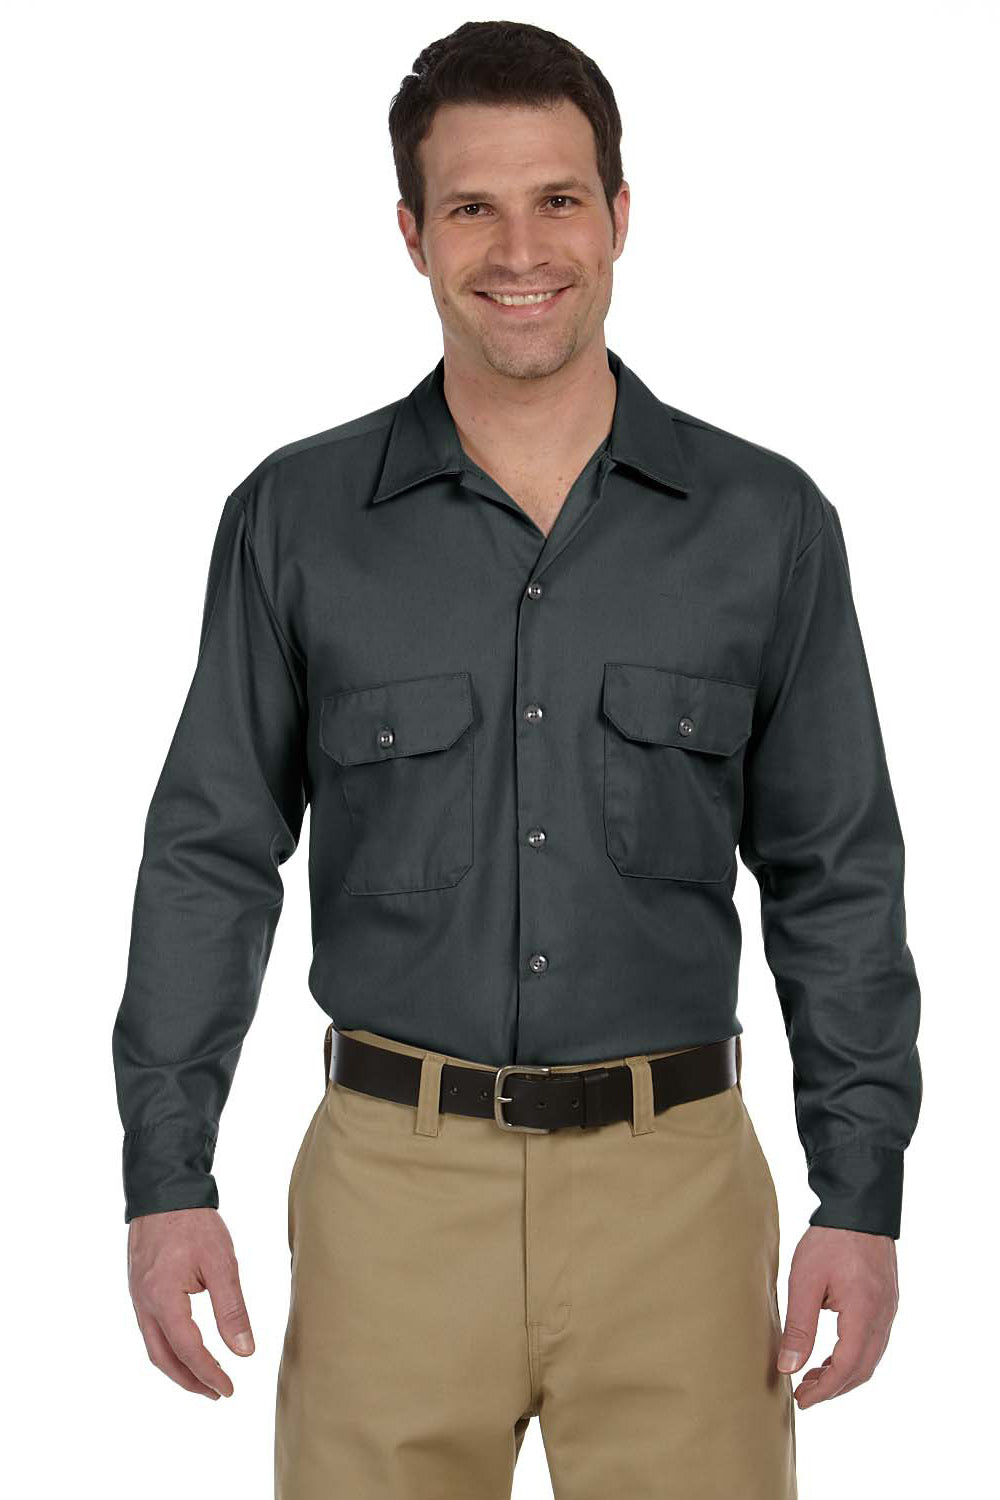 Dickies 574 Mens Moisture Wicking Long Sleeve Button Down Shirt w/ Double Pockets Charcoal Grey Front